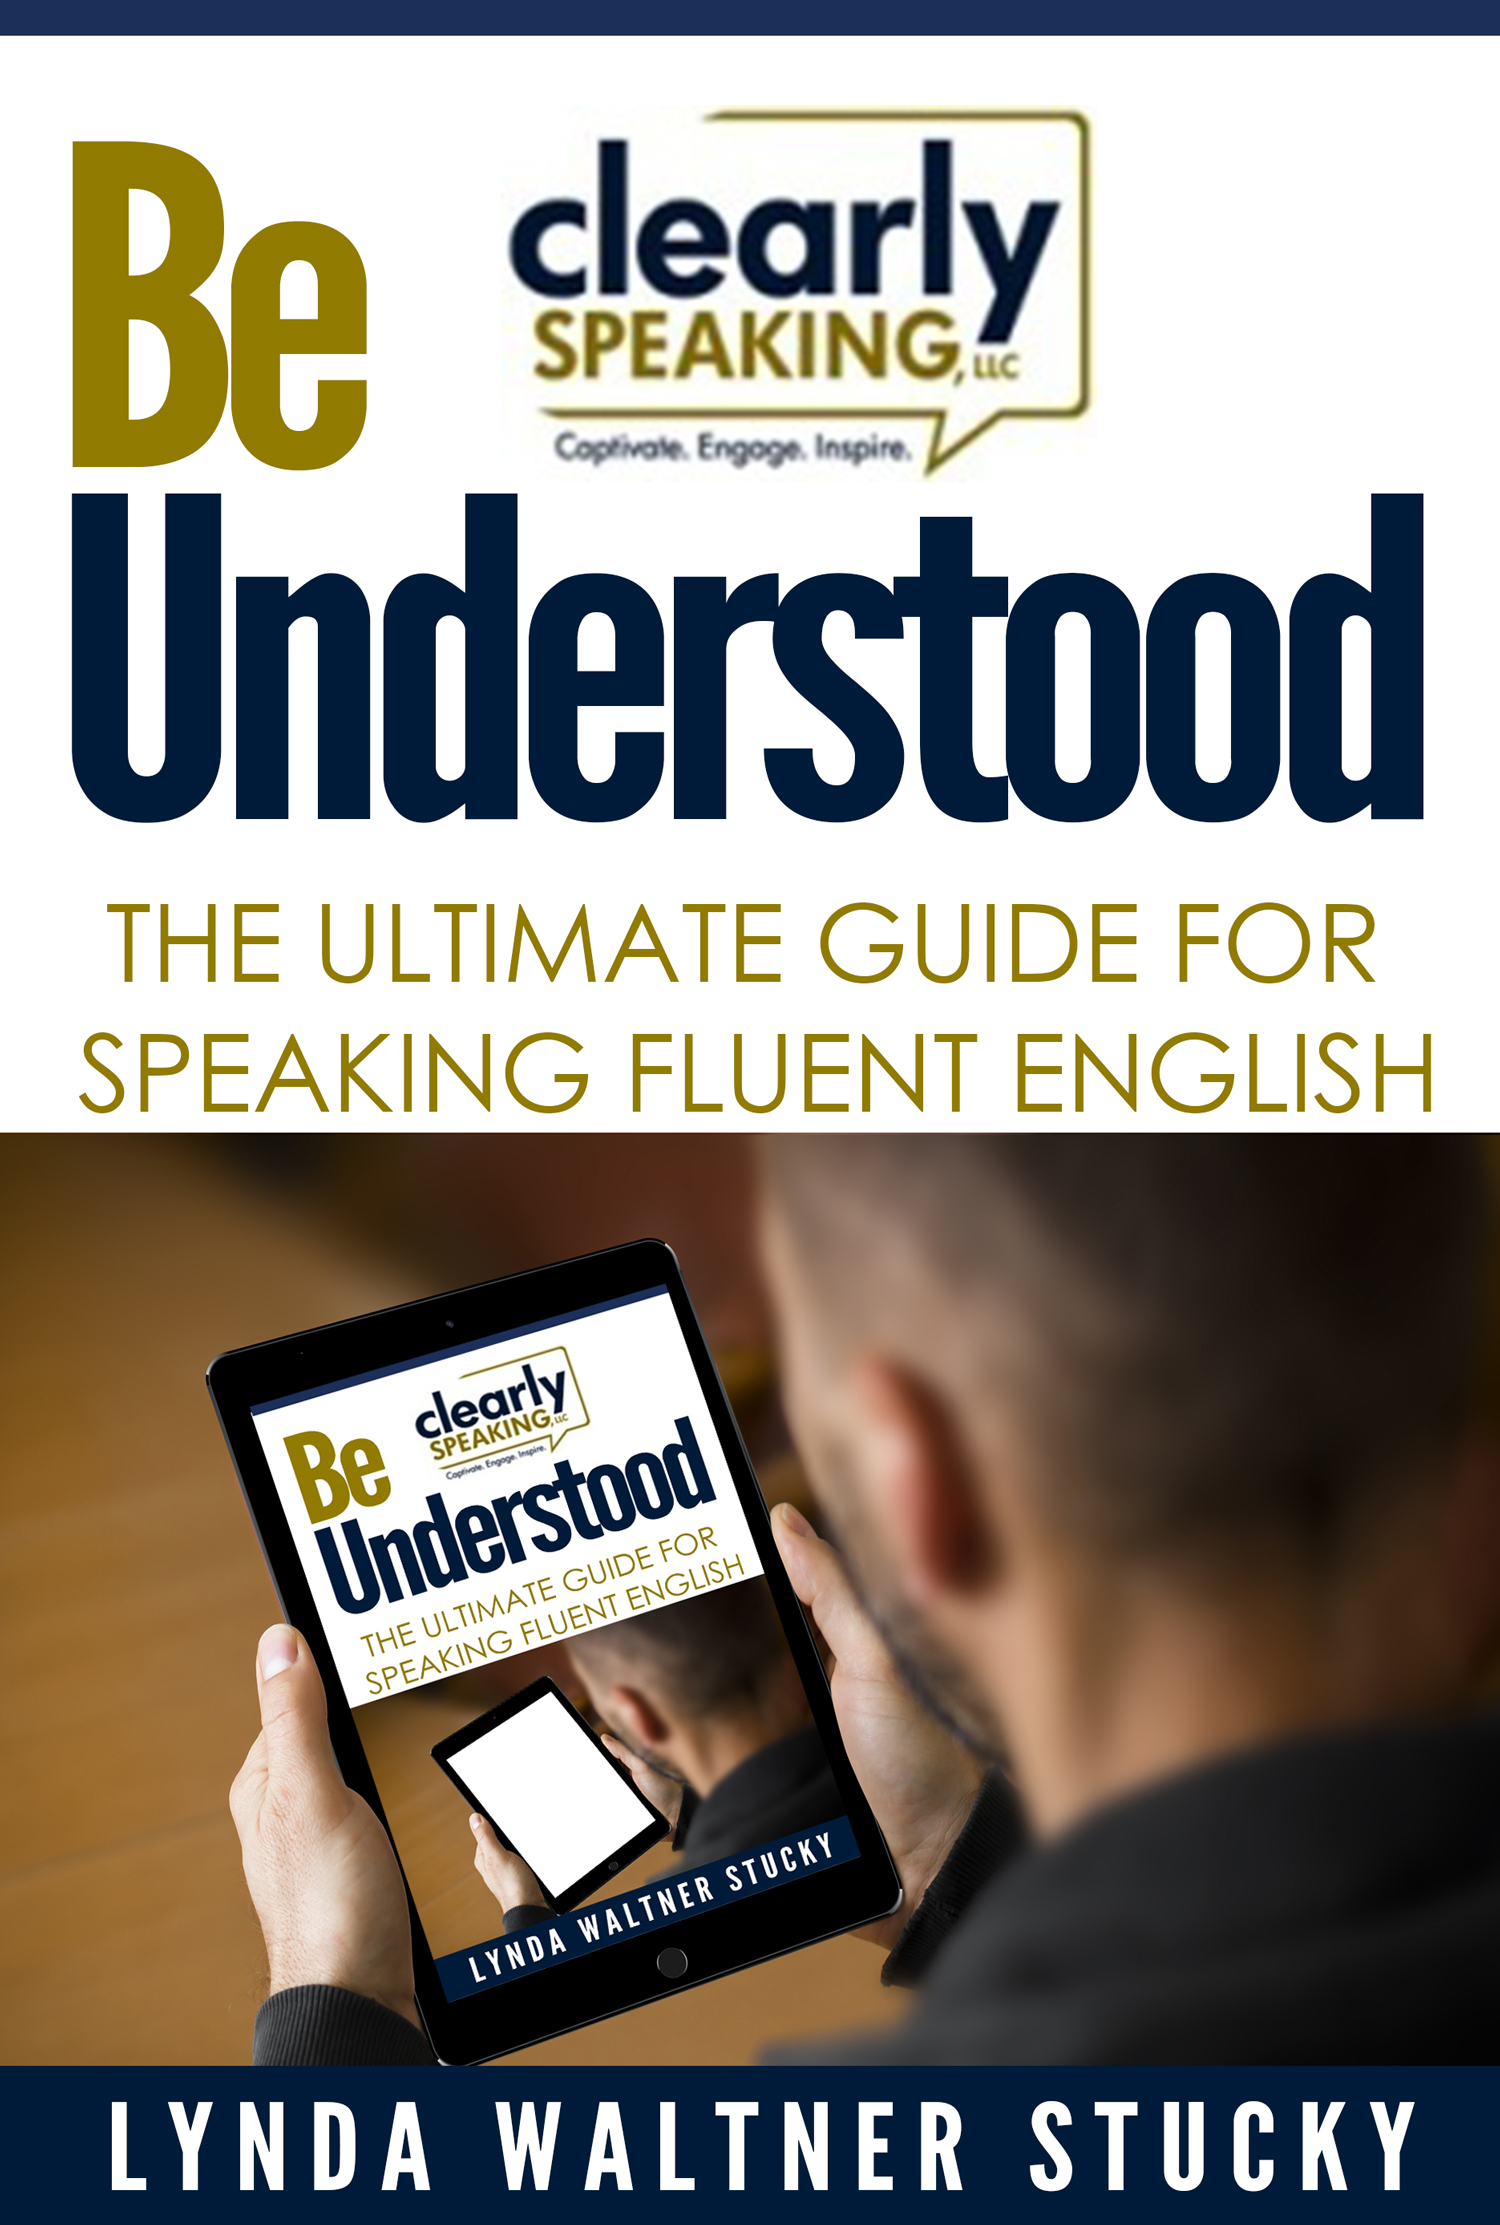 Be Understood The Ultimate Guide for Speaking Fluent English